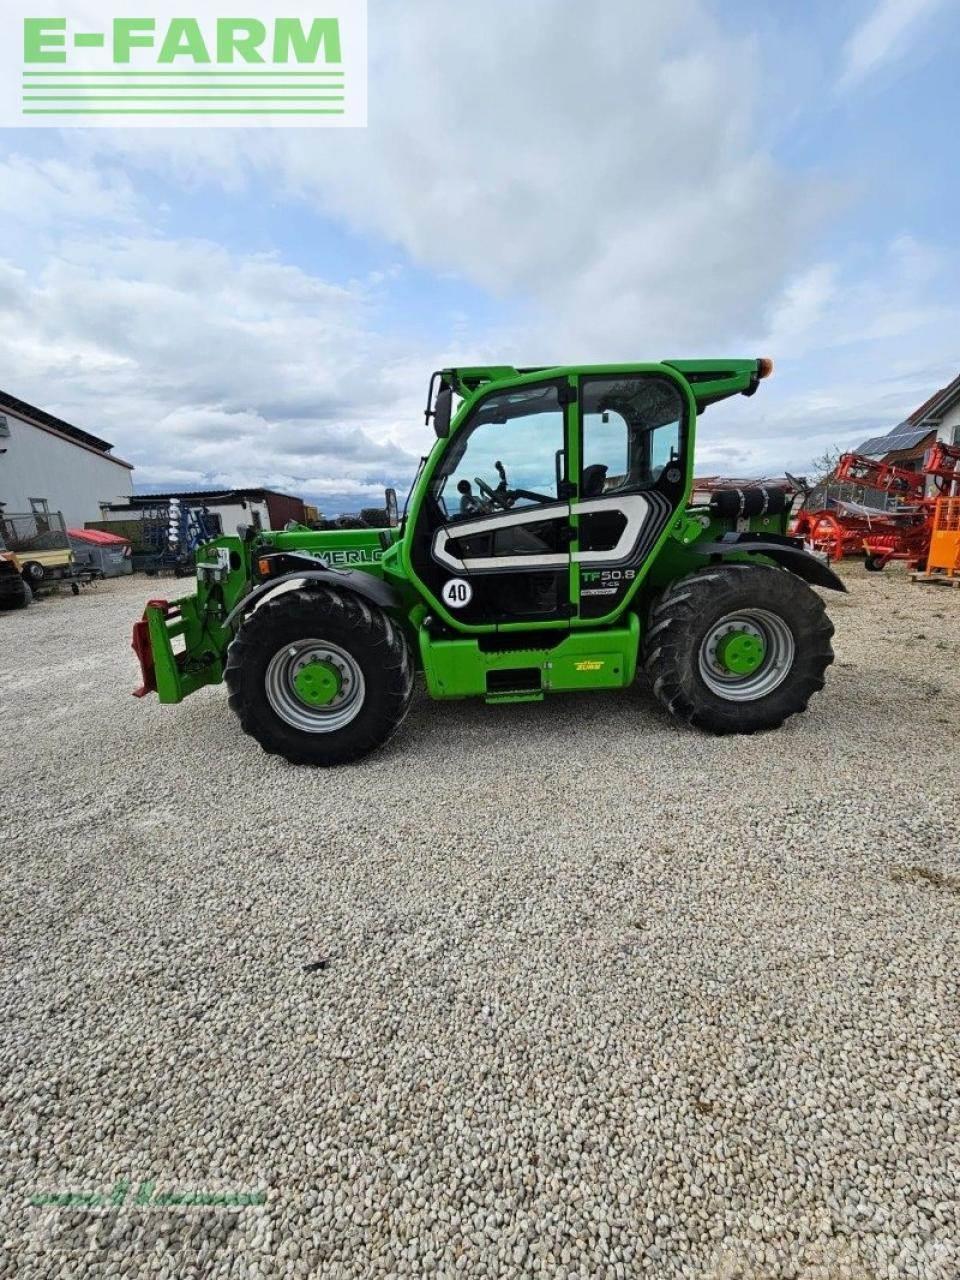 Merlo tf 50.8 tcs-156 cvtronic Telehandlers for agriculture